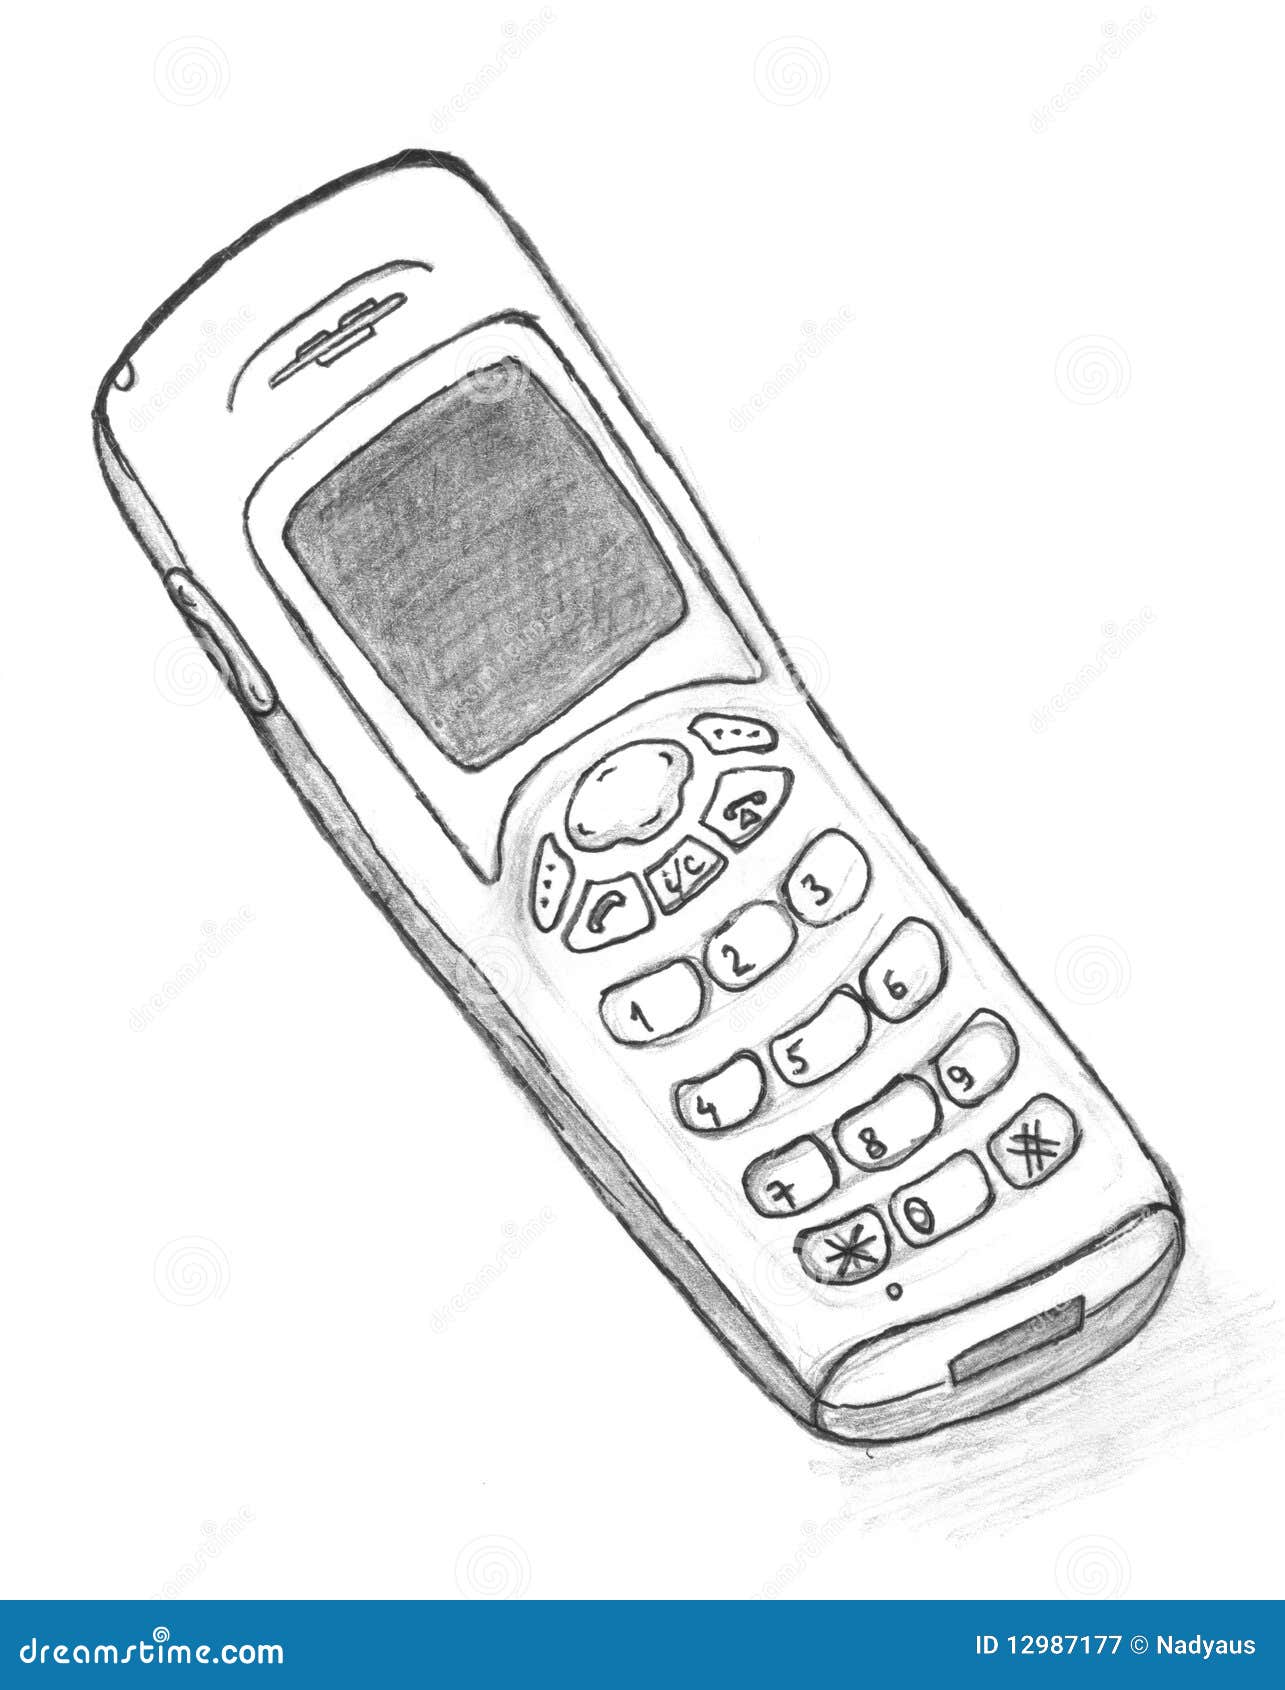 How to Draw a Cell Phone - Create an Advanced Cell Phone